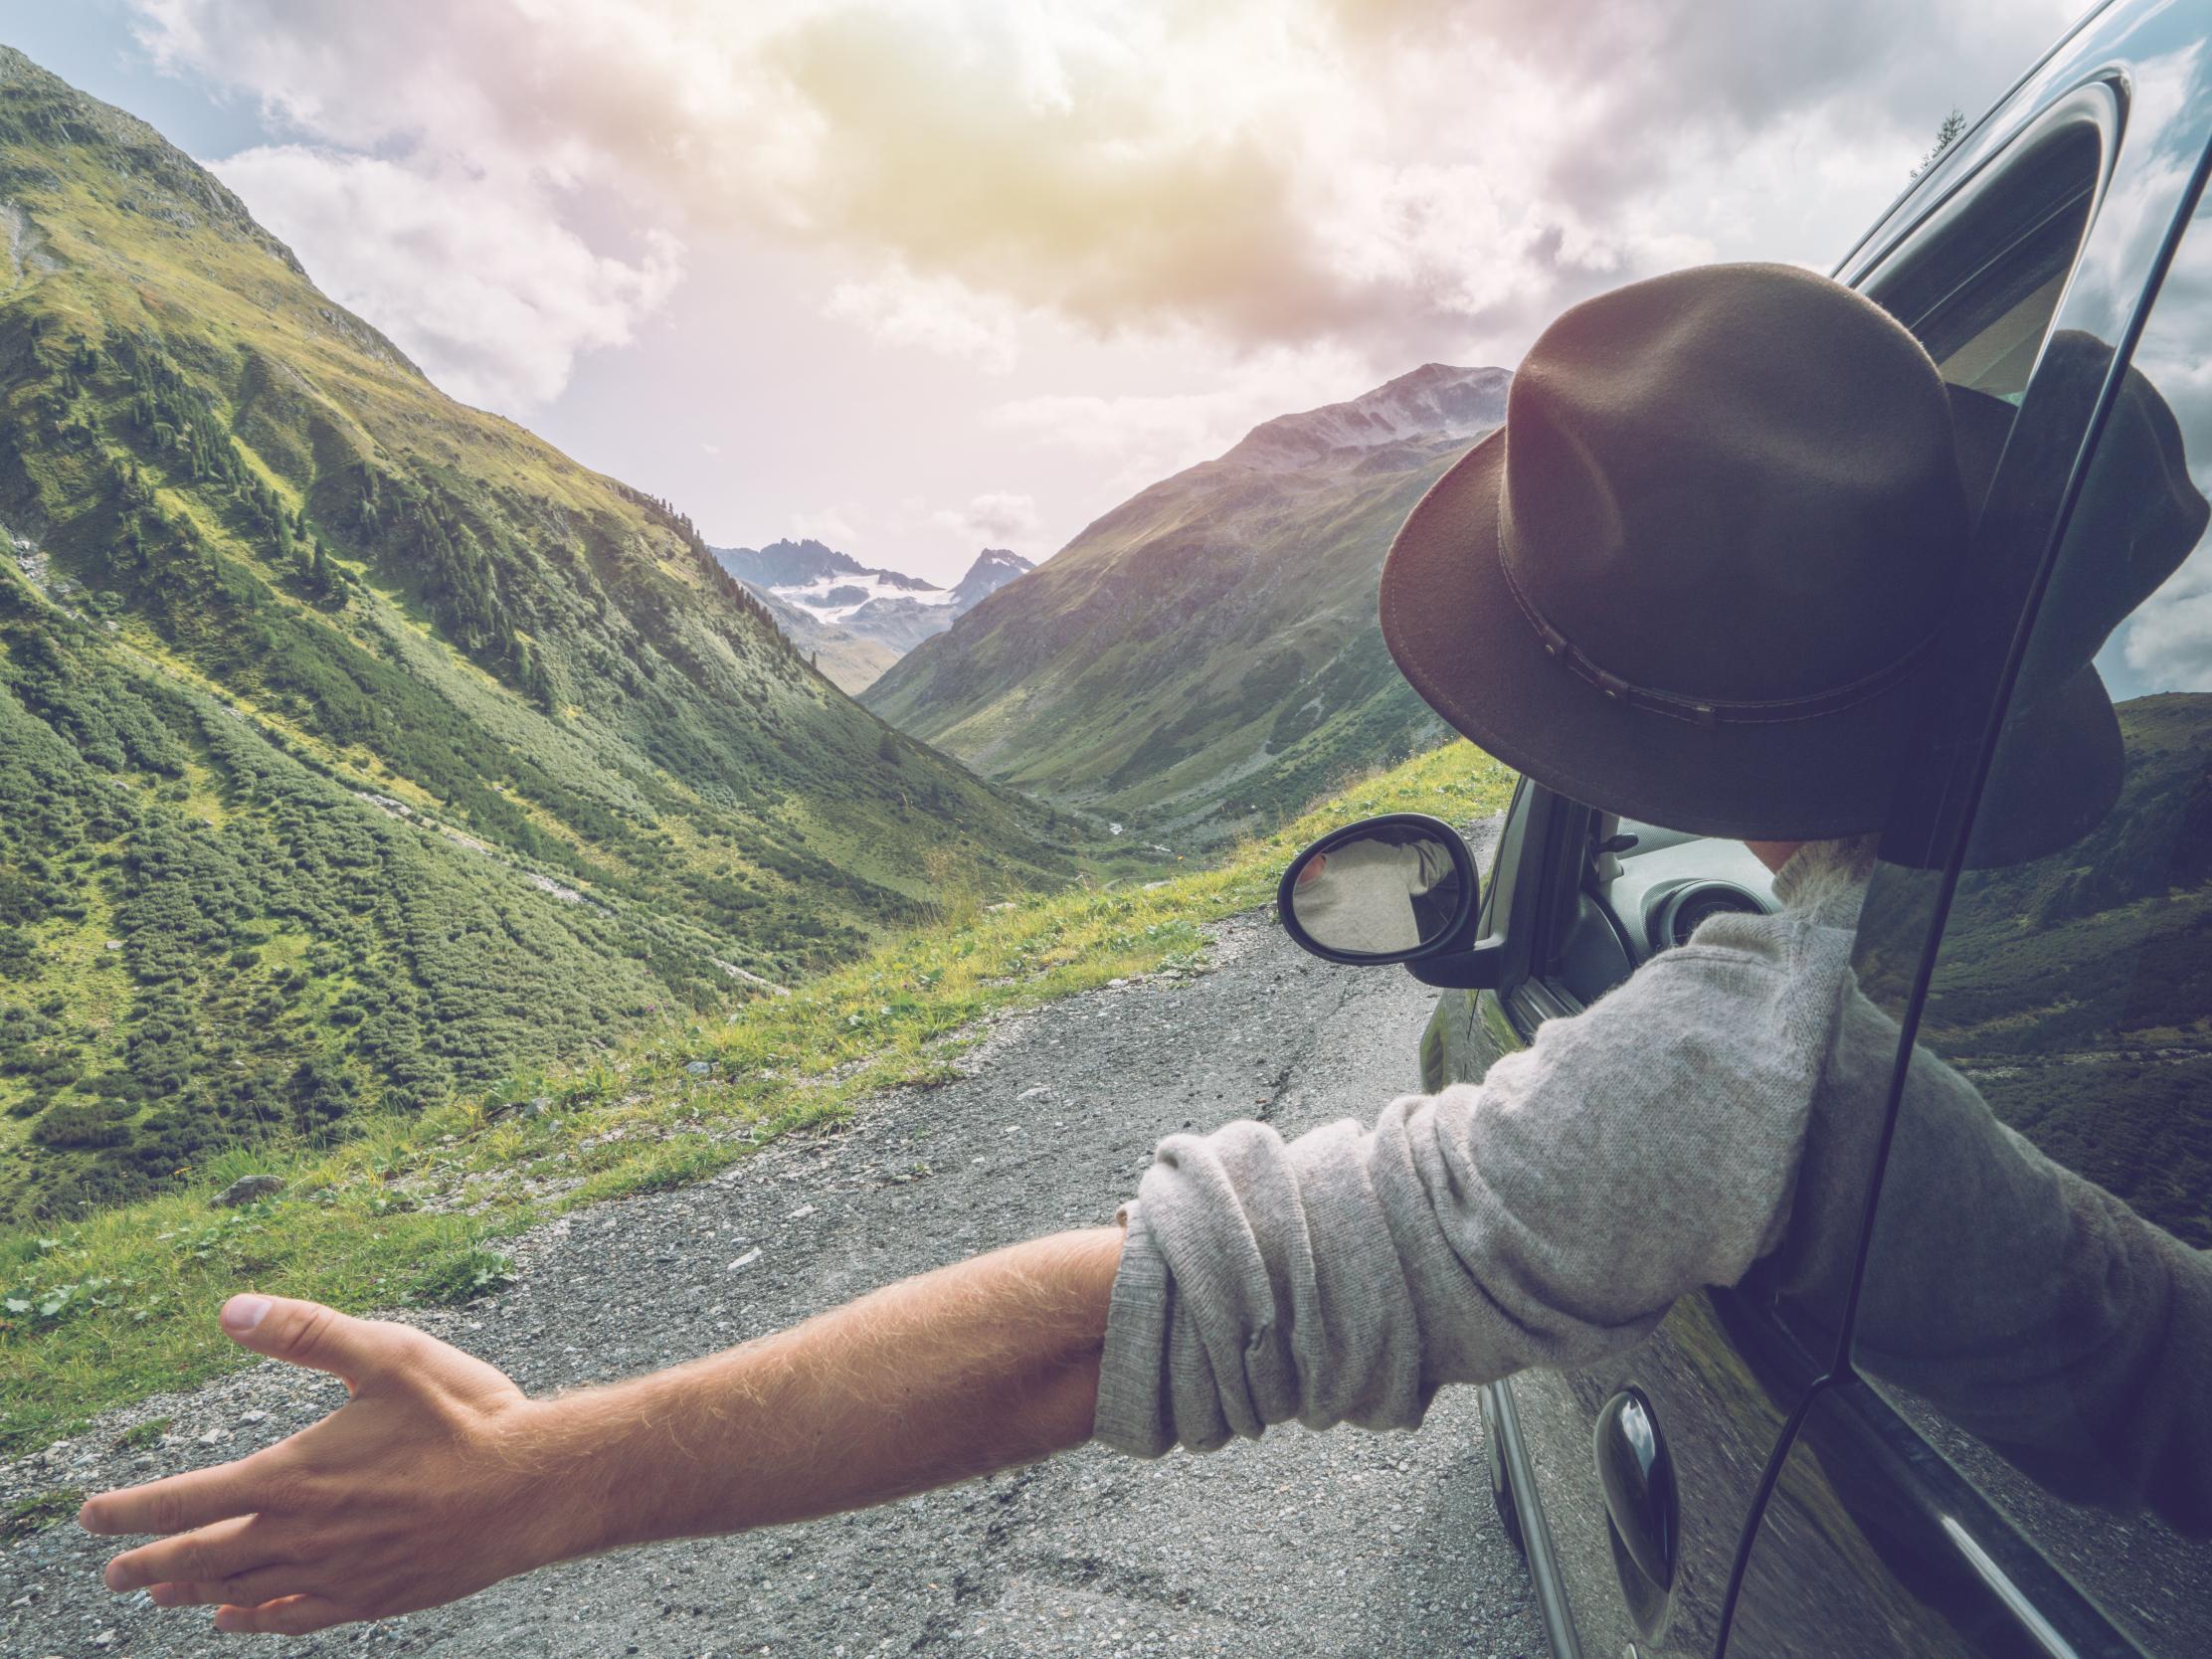 Most British people prefer a road trip at home to travelling abroad, poll claims